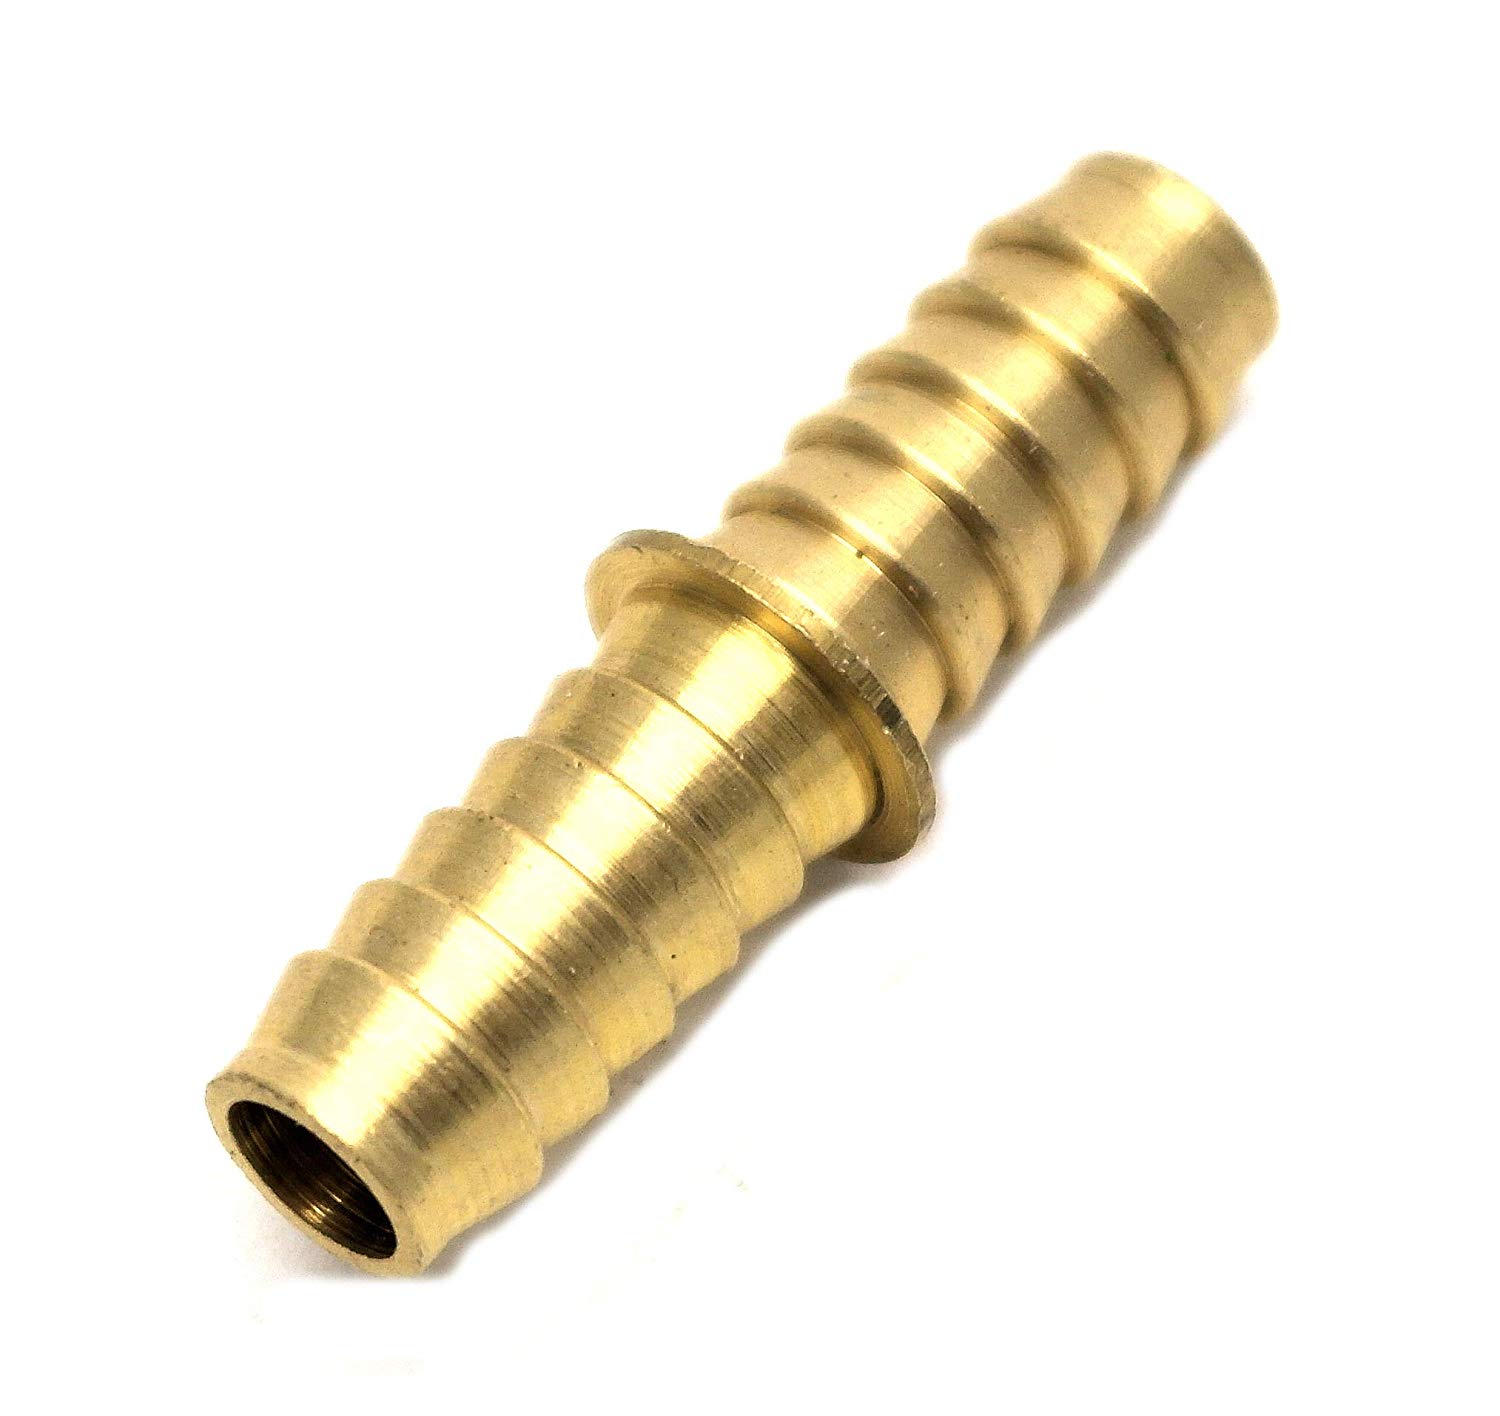 British Made 6Mm Brass Hose Repair Fitting 6Mm Hose Connector (10 ...